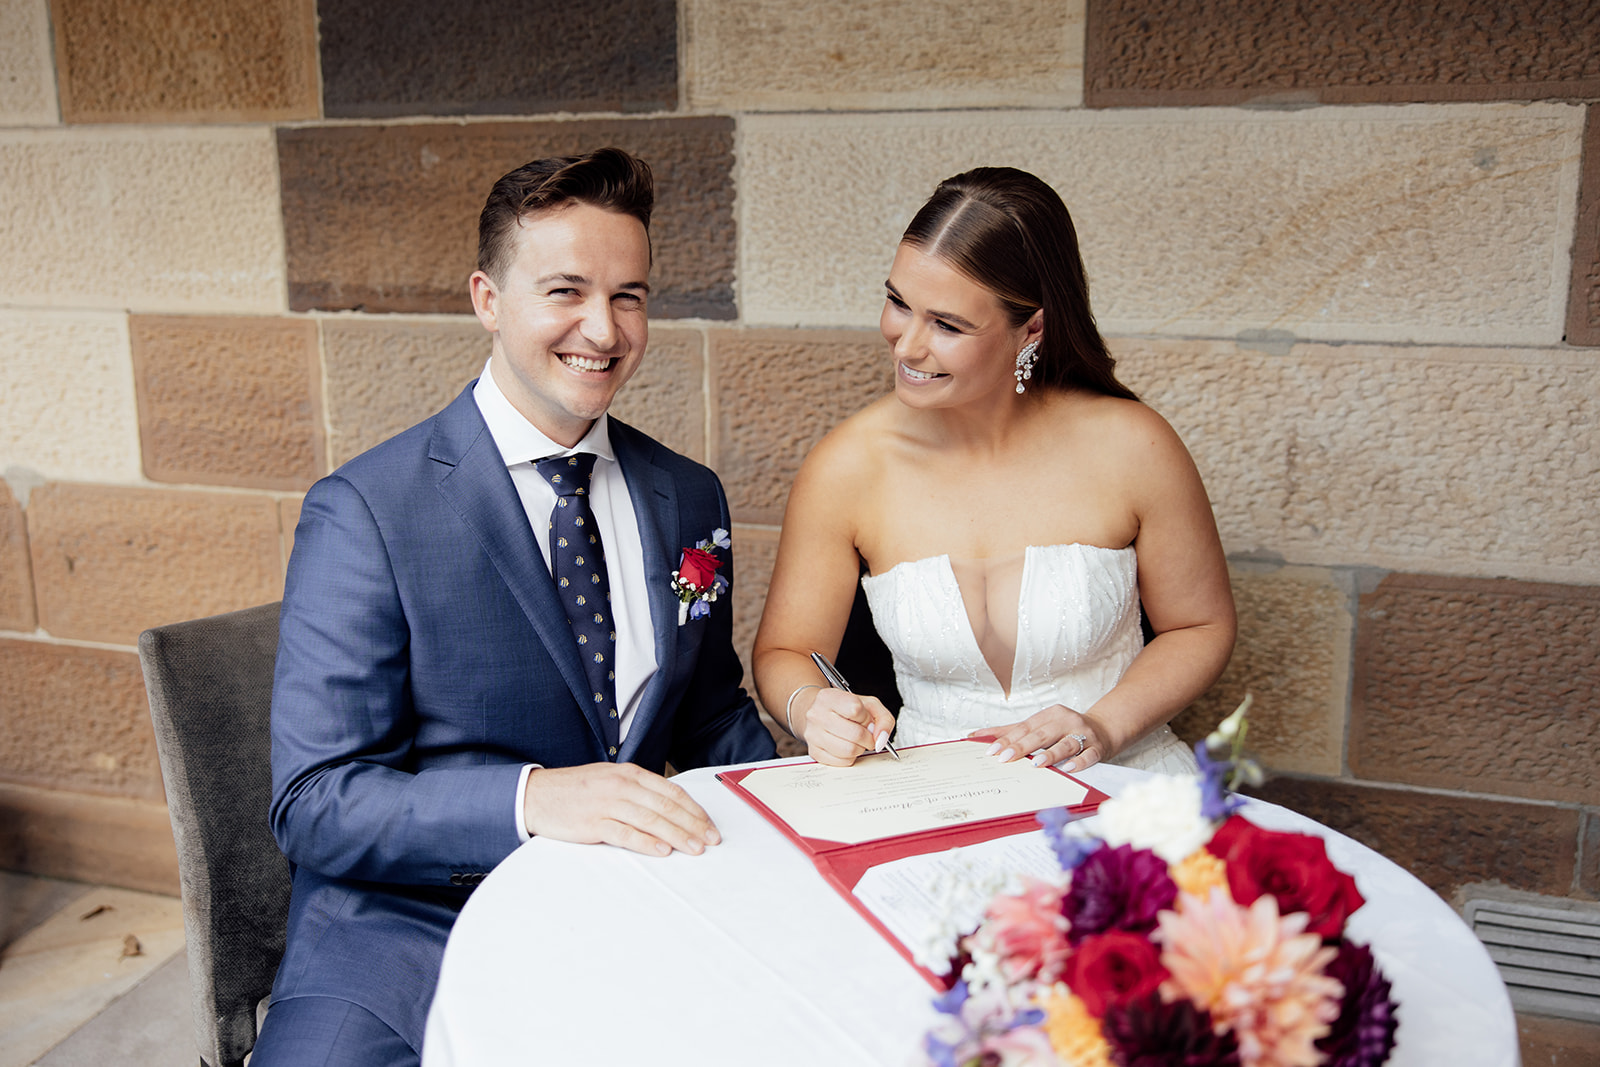 A bride and groom signing their marriage certificate.